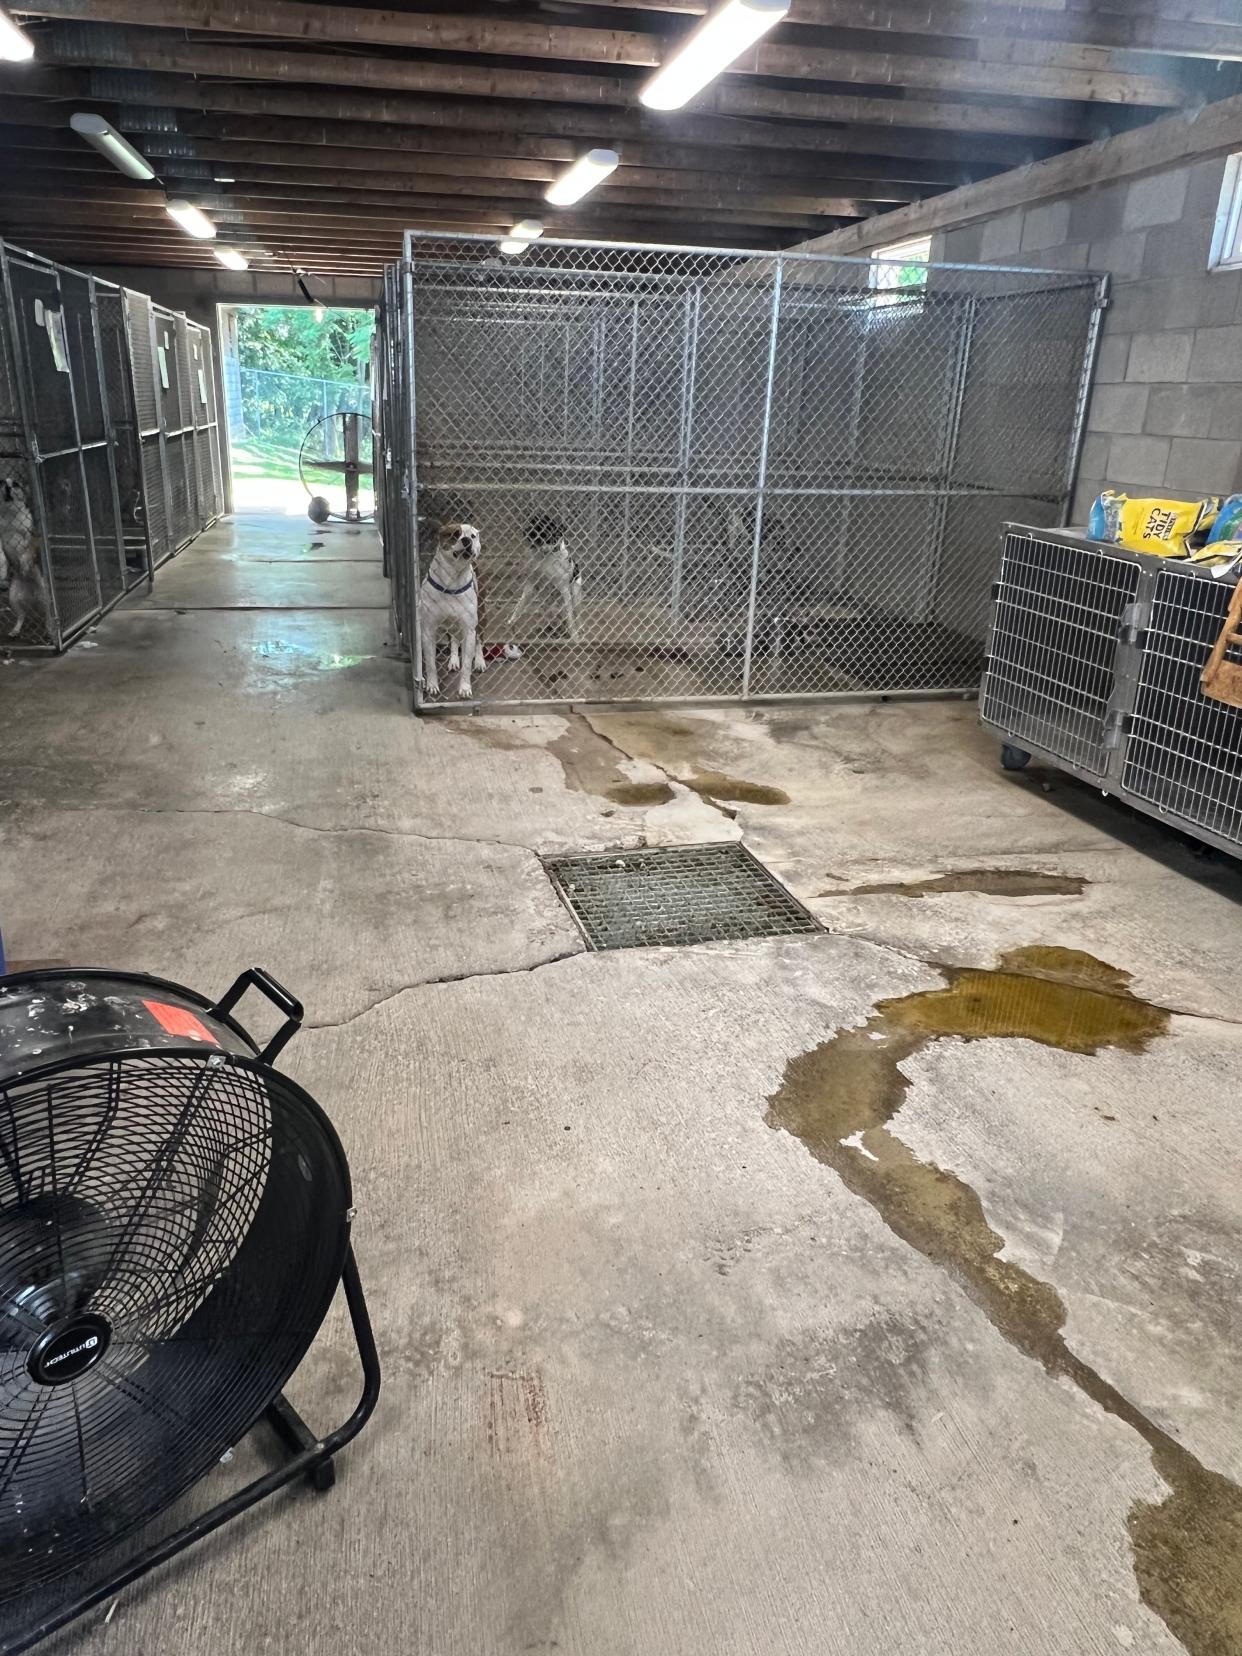 Inadequate drainage leads to water puddling on the floor of the Guernsey County Dog Shelter.